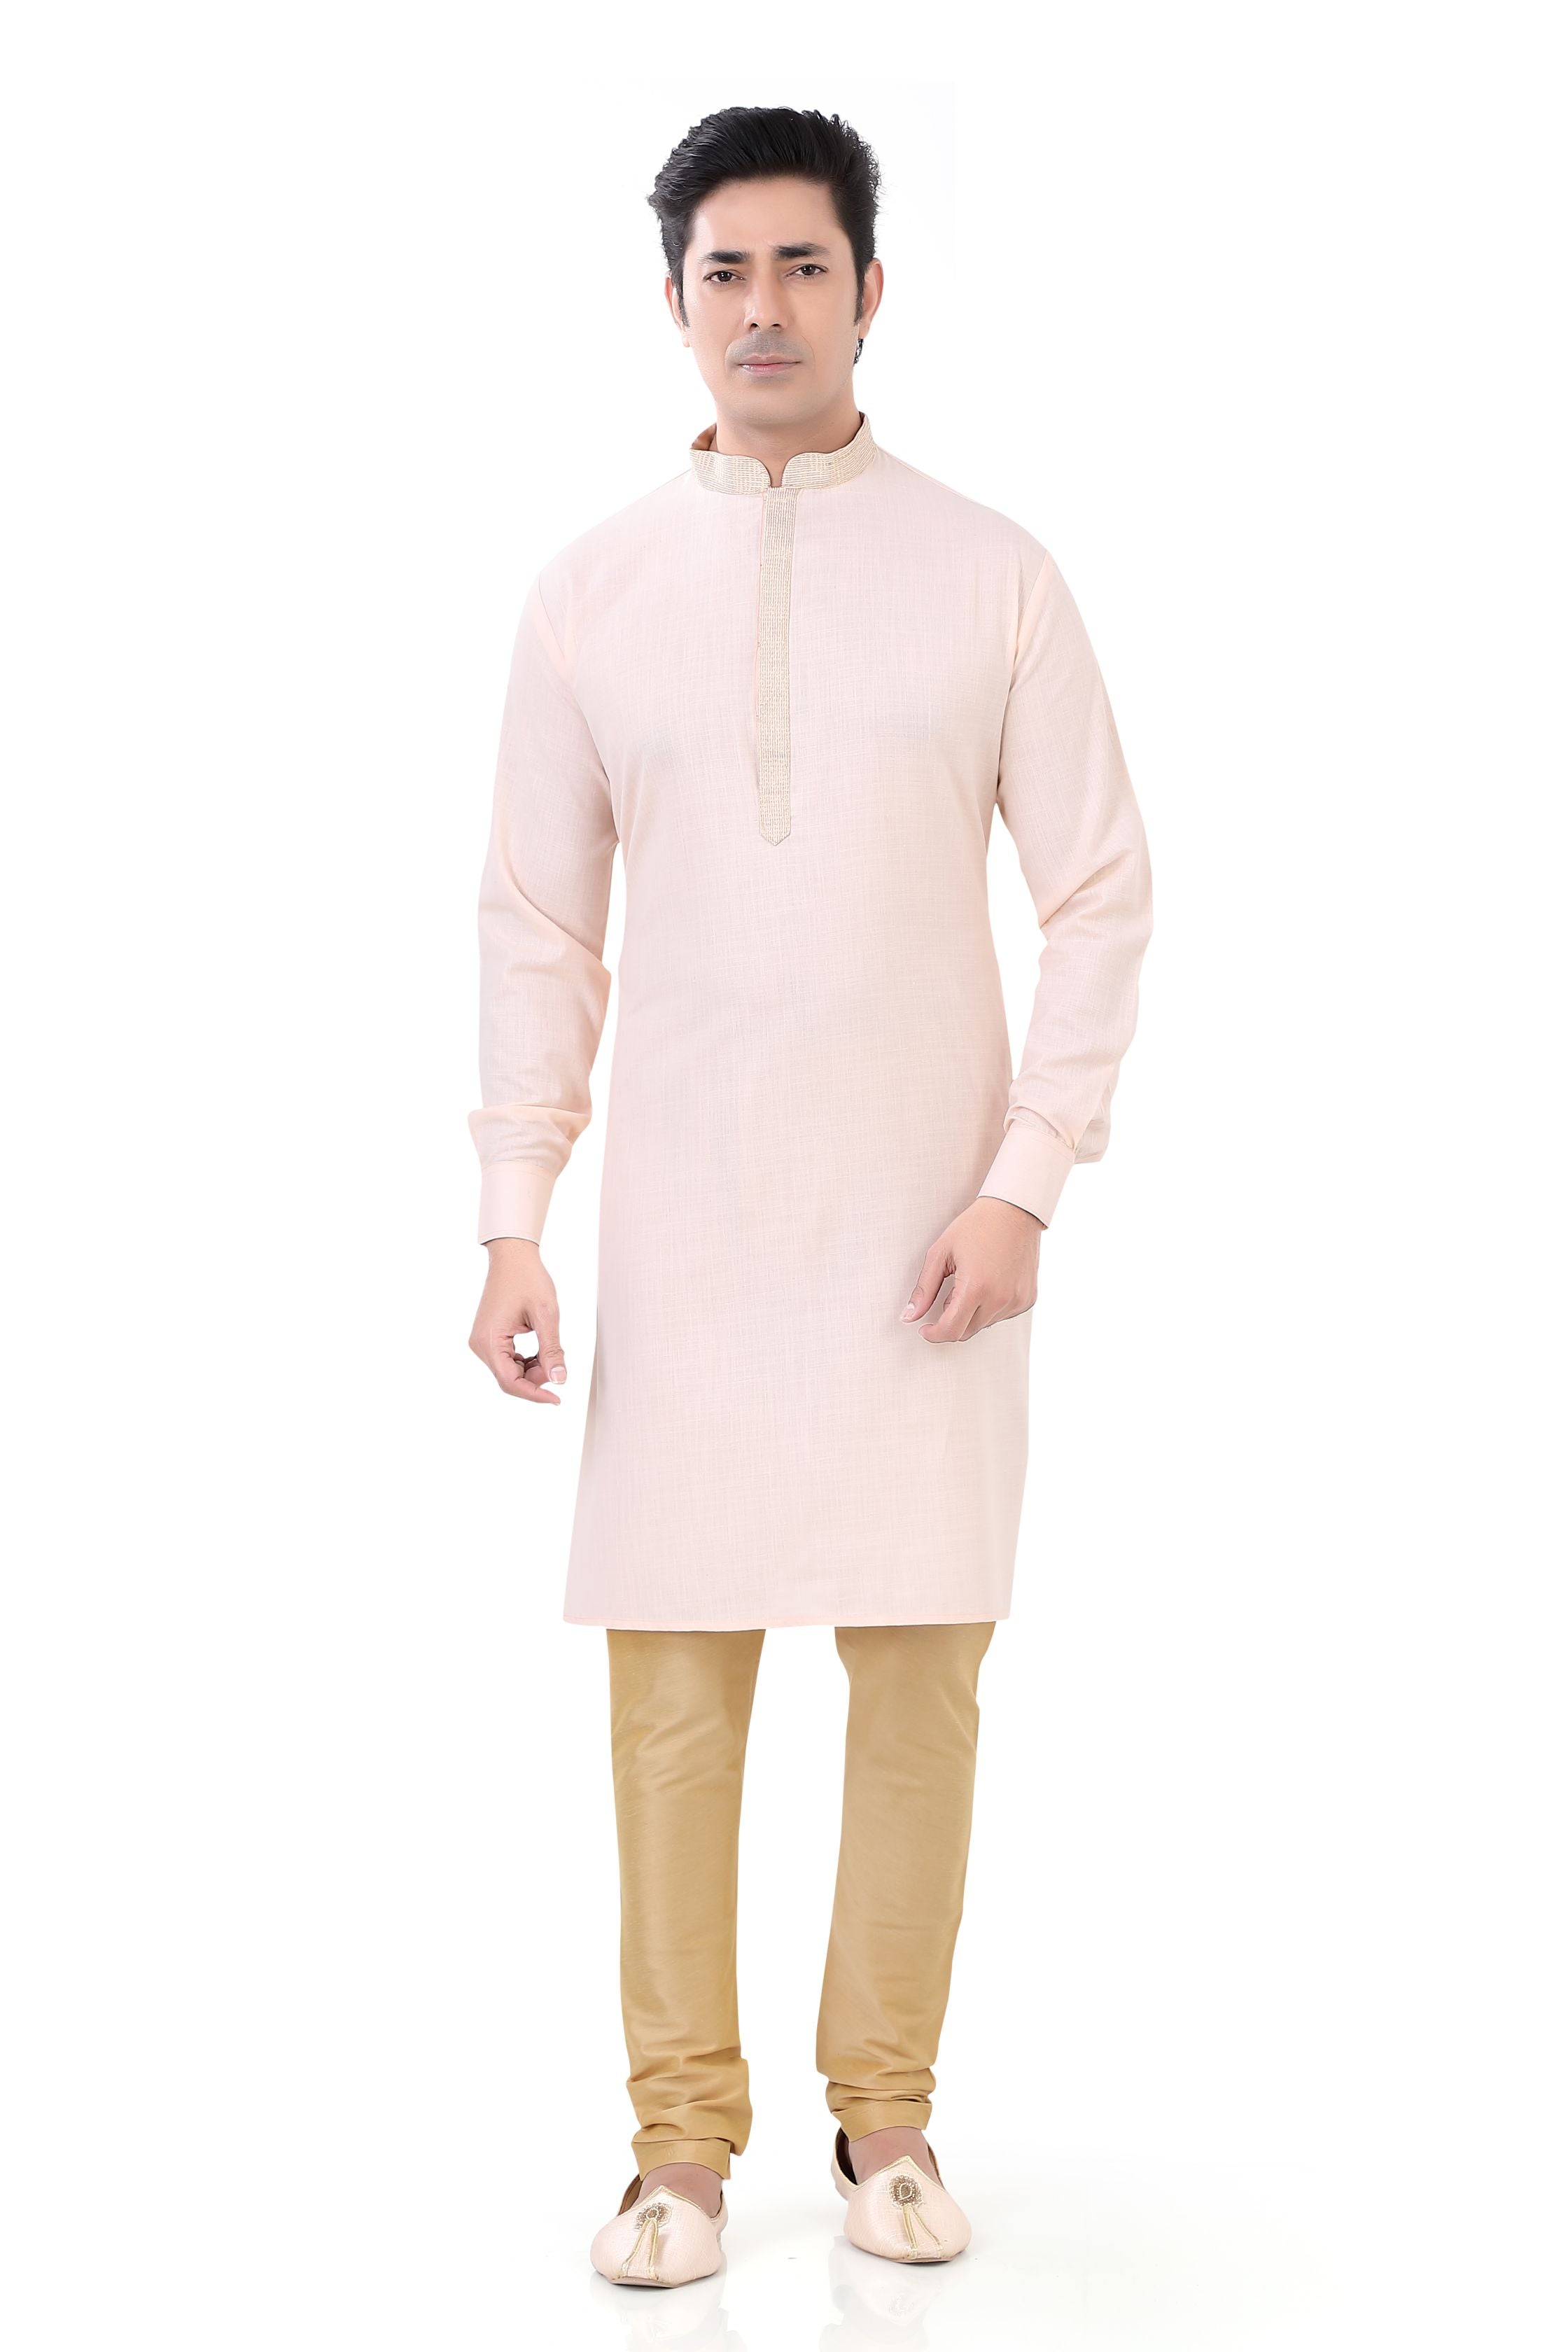 Cotton Anchor embroidery Kurta Pajama in Light Peach Colour - Premium kurta pajama from Dapper Ethnic - Just $59! Shop now at Dulhan Exclusives